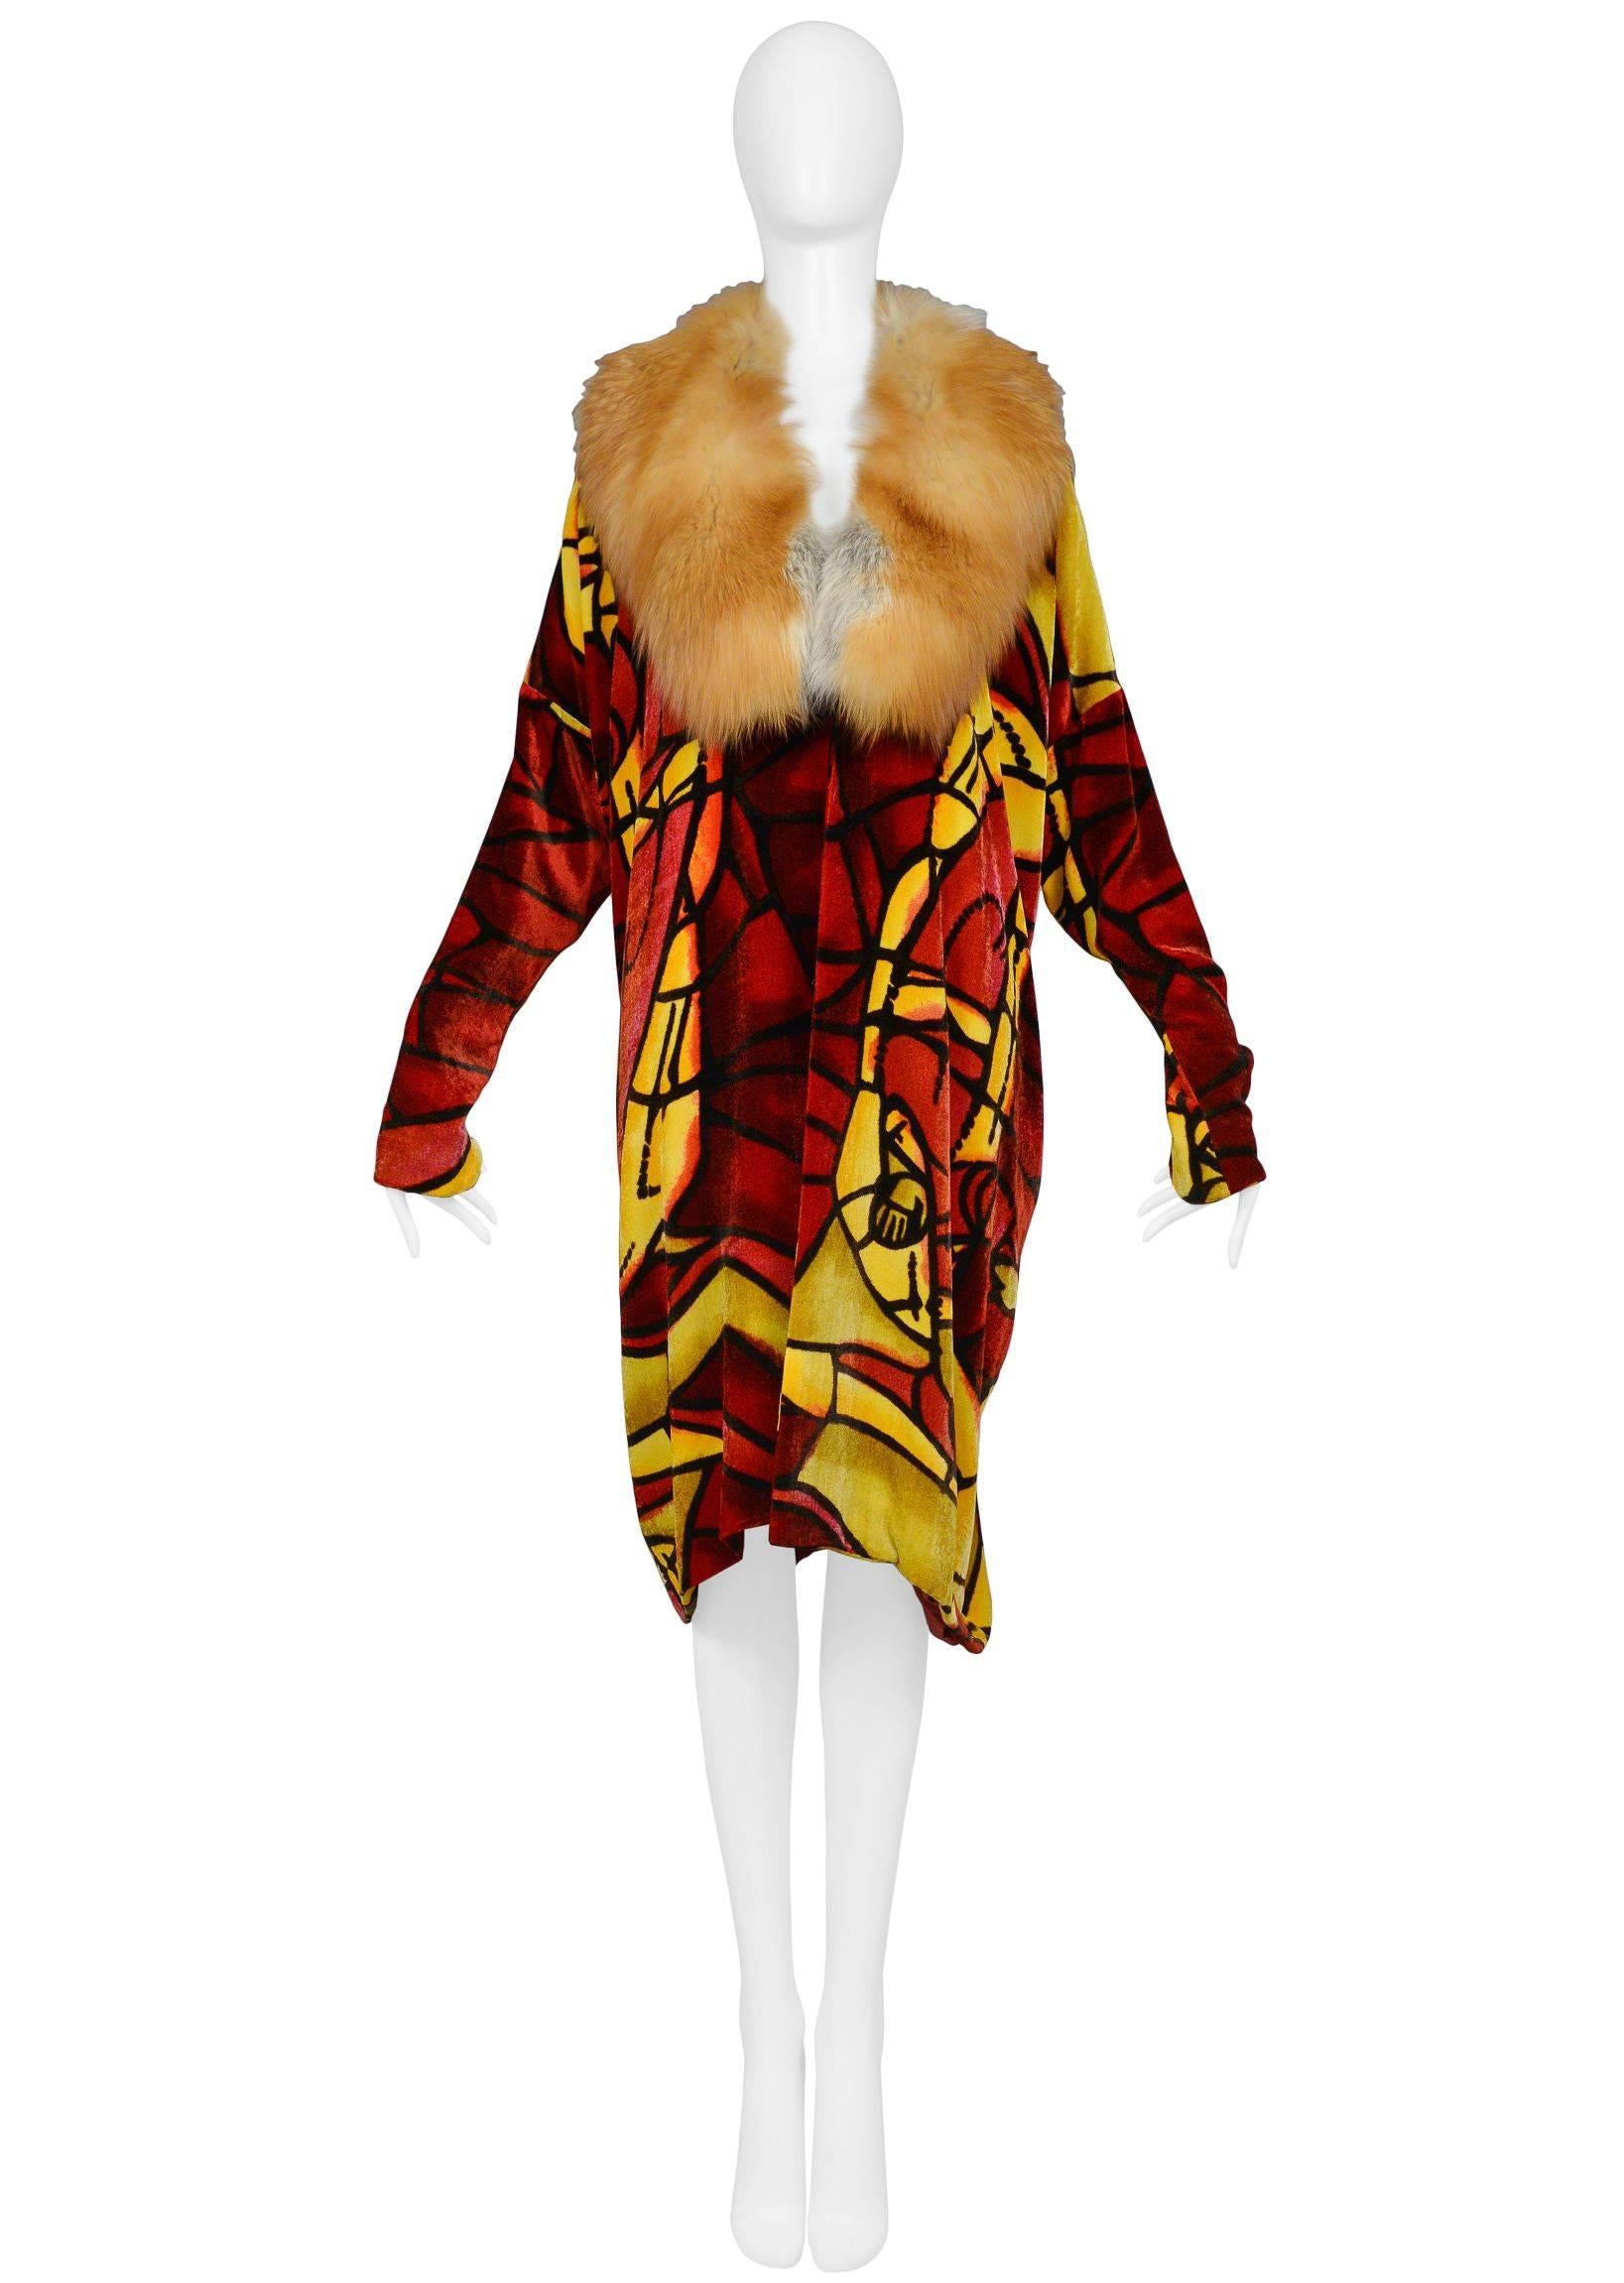 Christian Dior by John Galliano Deco Style Velvet Kimono Opera Coat with Fox Fur Collar.  Features: Jewel tone stained glass print, cocoon 1920's style body, large red fox fur collar, soft drop shoulders, easy armholes, and long sleeves with narrow